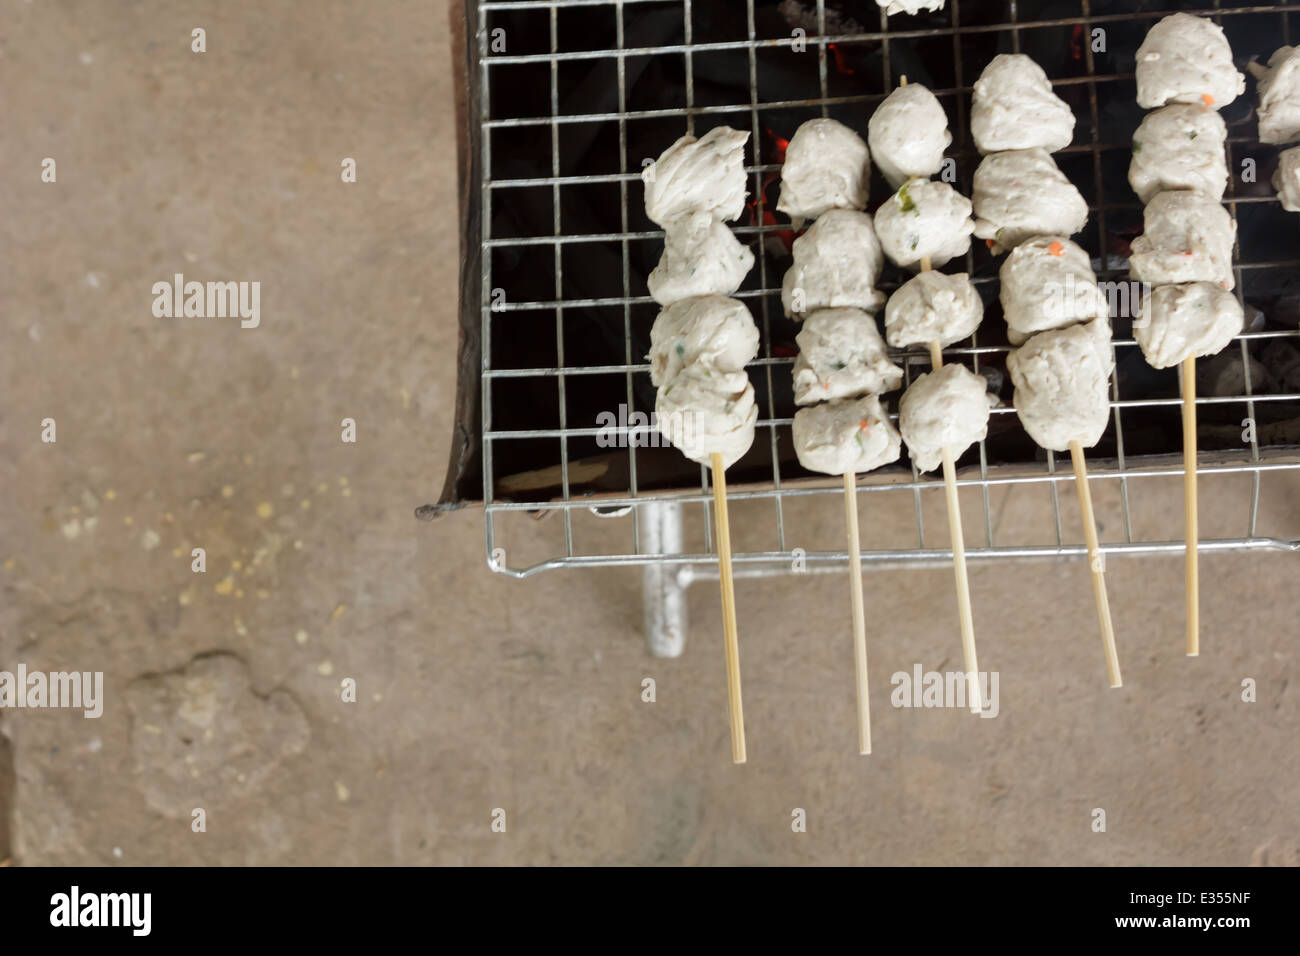 Grilled meat ball Stock Photo